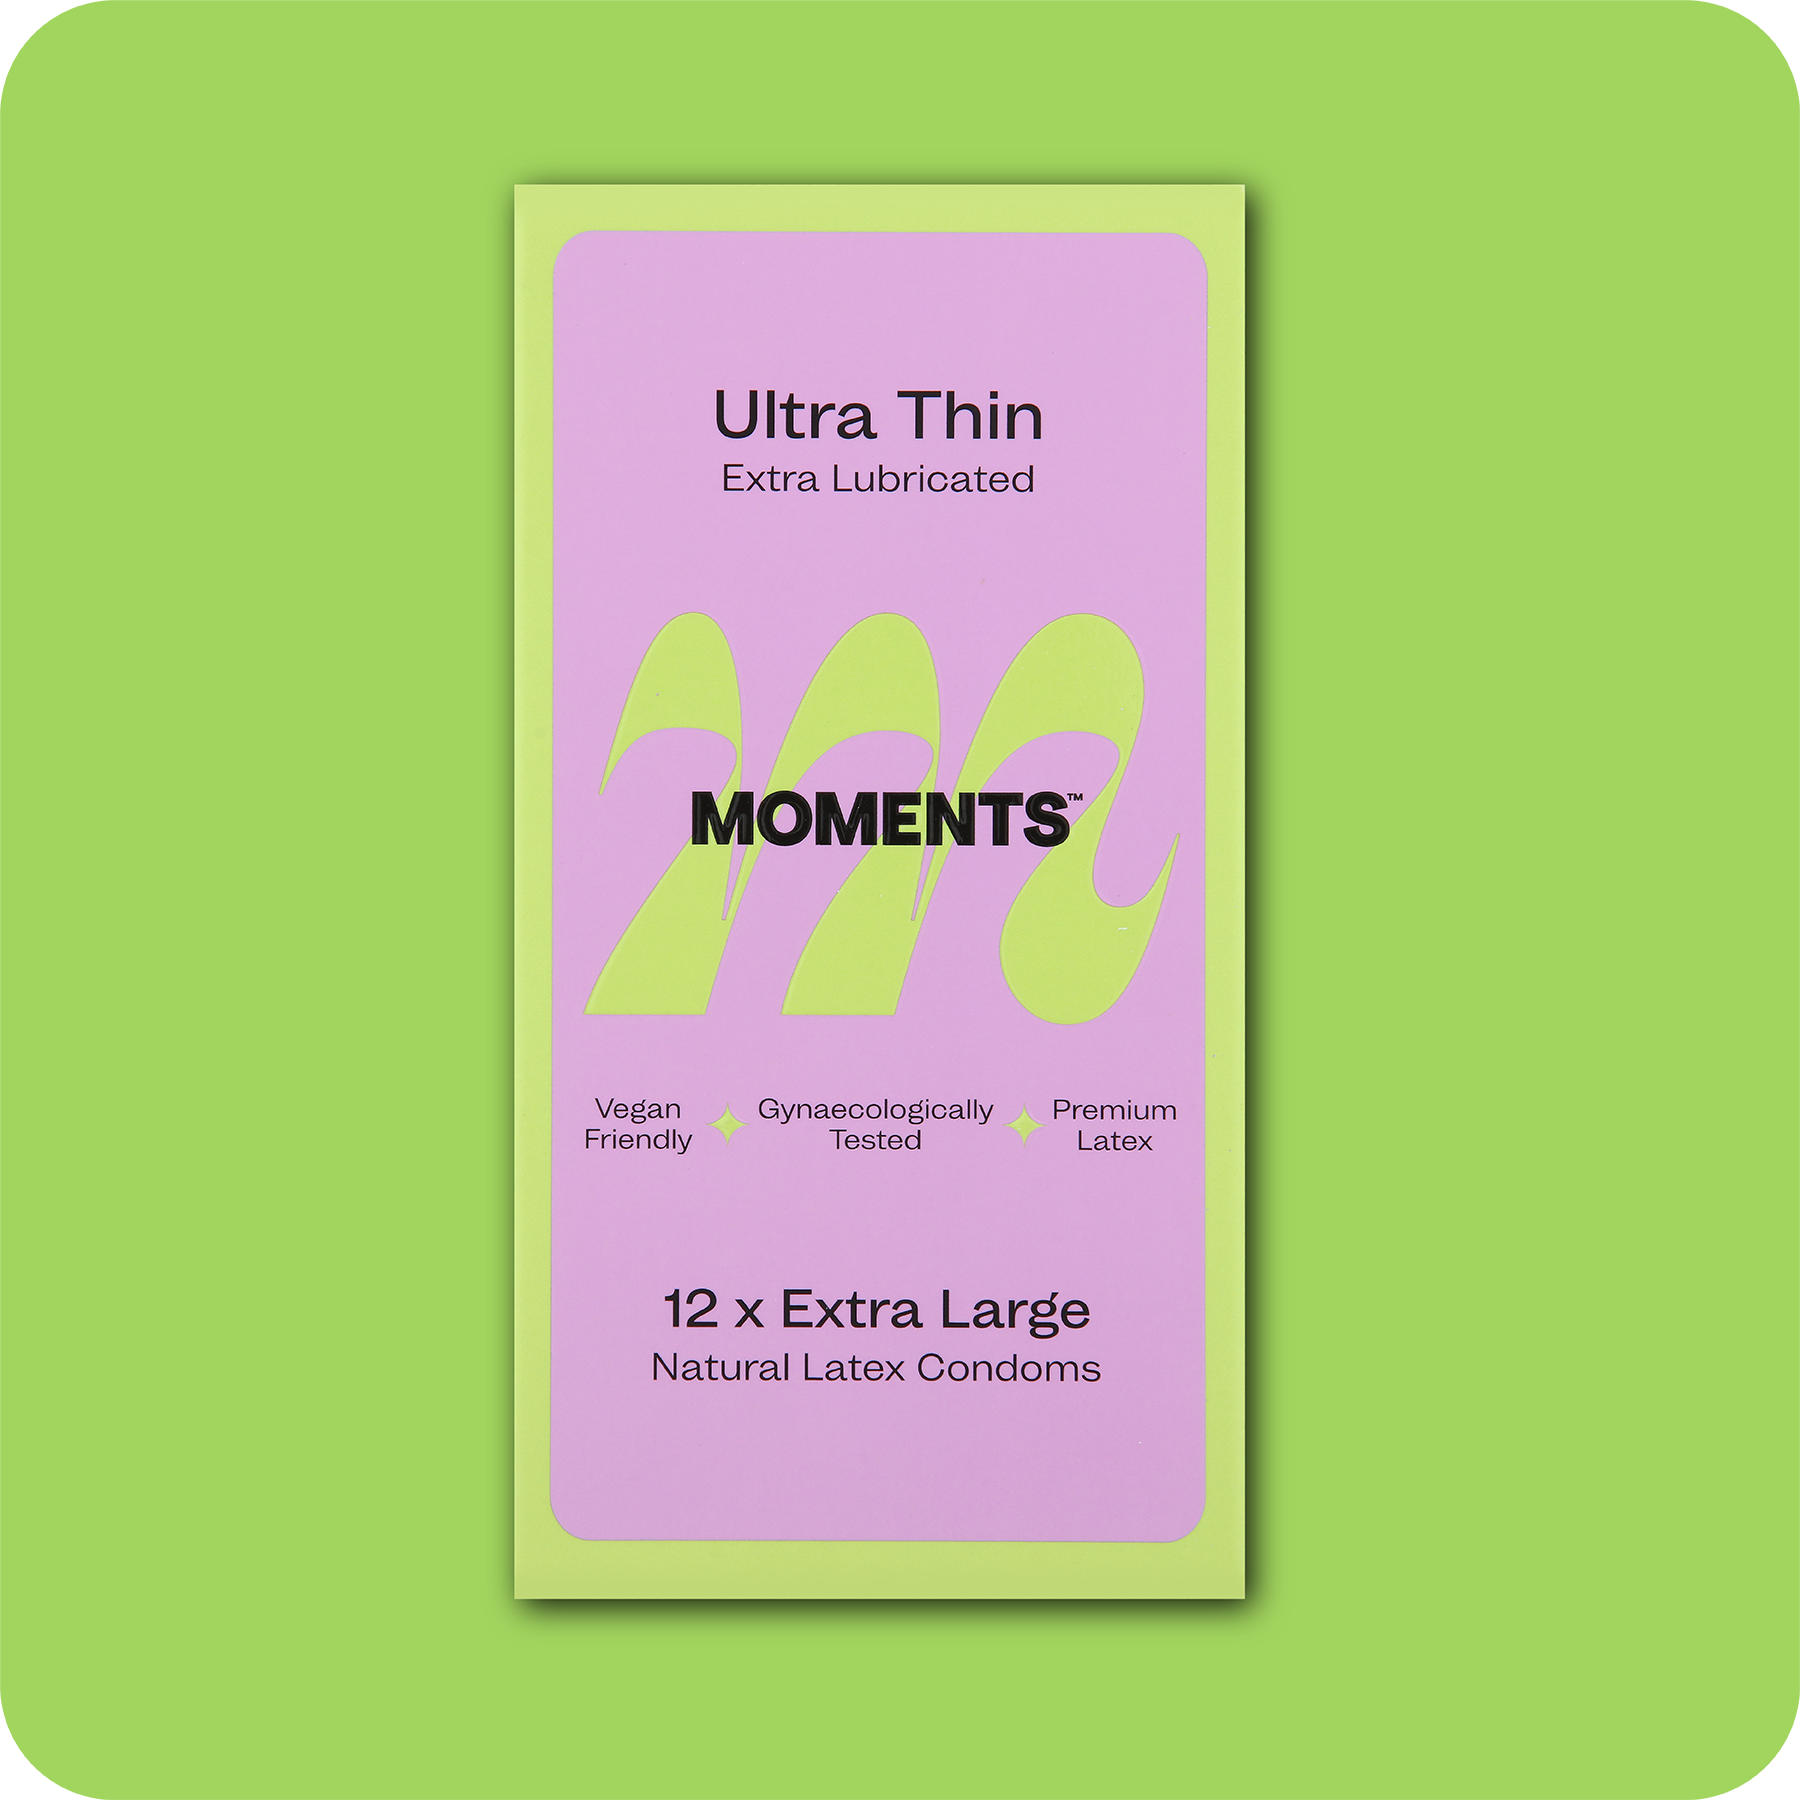 Moments Ultra Thin Extra Large condom box against a green backdrop